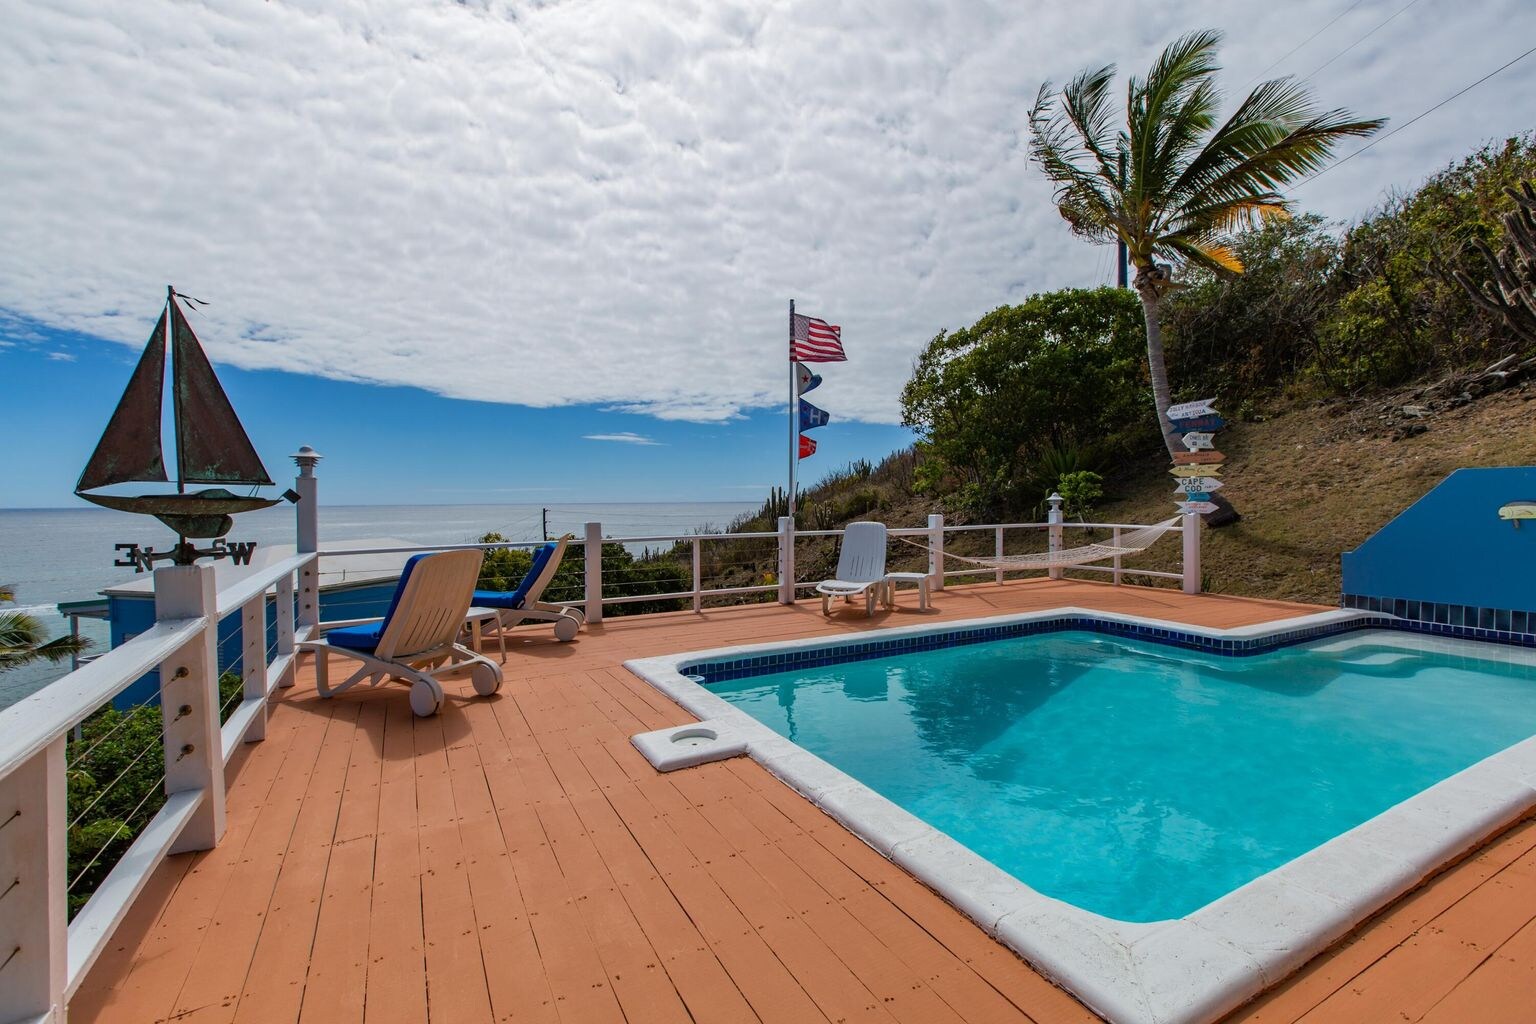 Property Image 1 - Welcome to Villa Sunrise! 3 bedrooms, 3 Baths, Private Pool! Located on the East End of St. Croix!